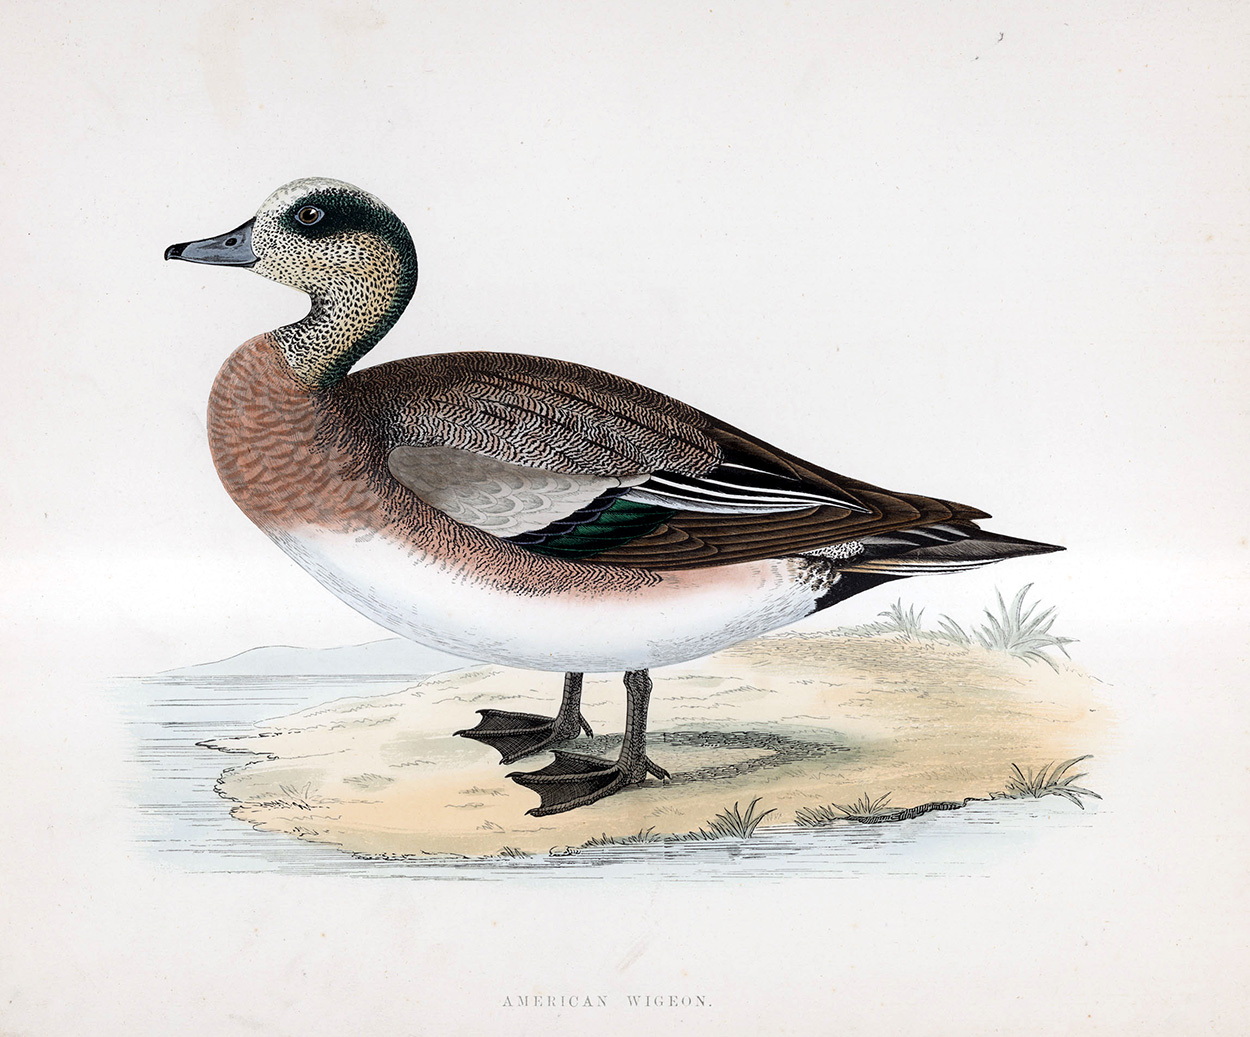 American Wigeon - hand coloured lithograph 1891 (Print) art by Beverley R Morris at The Illustration Art Gallery